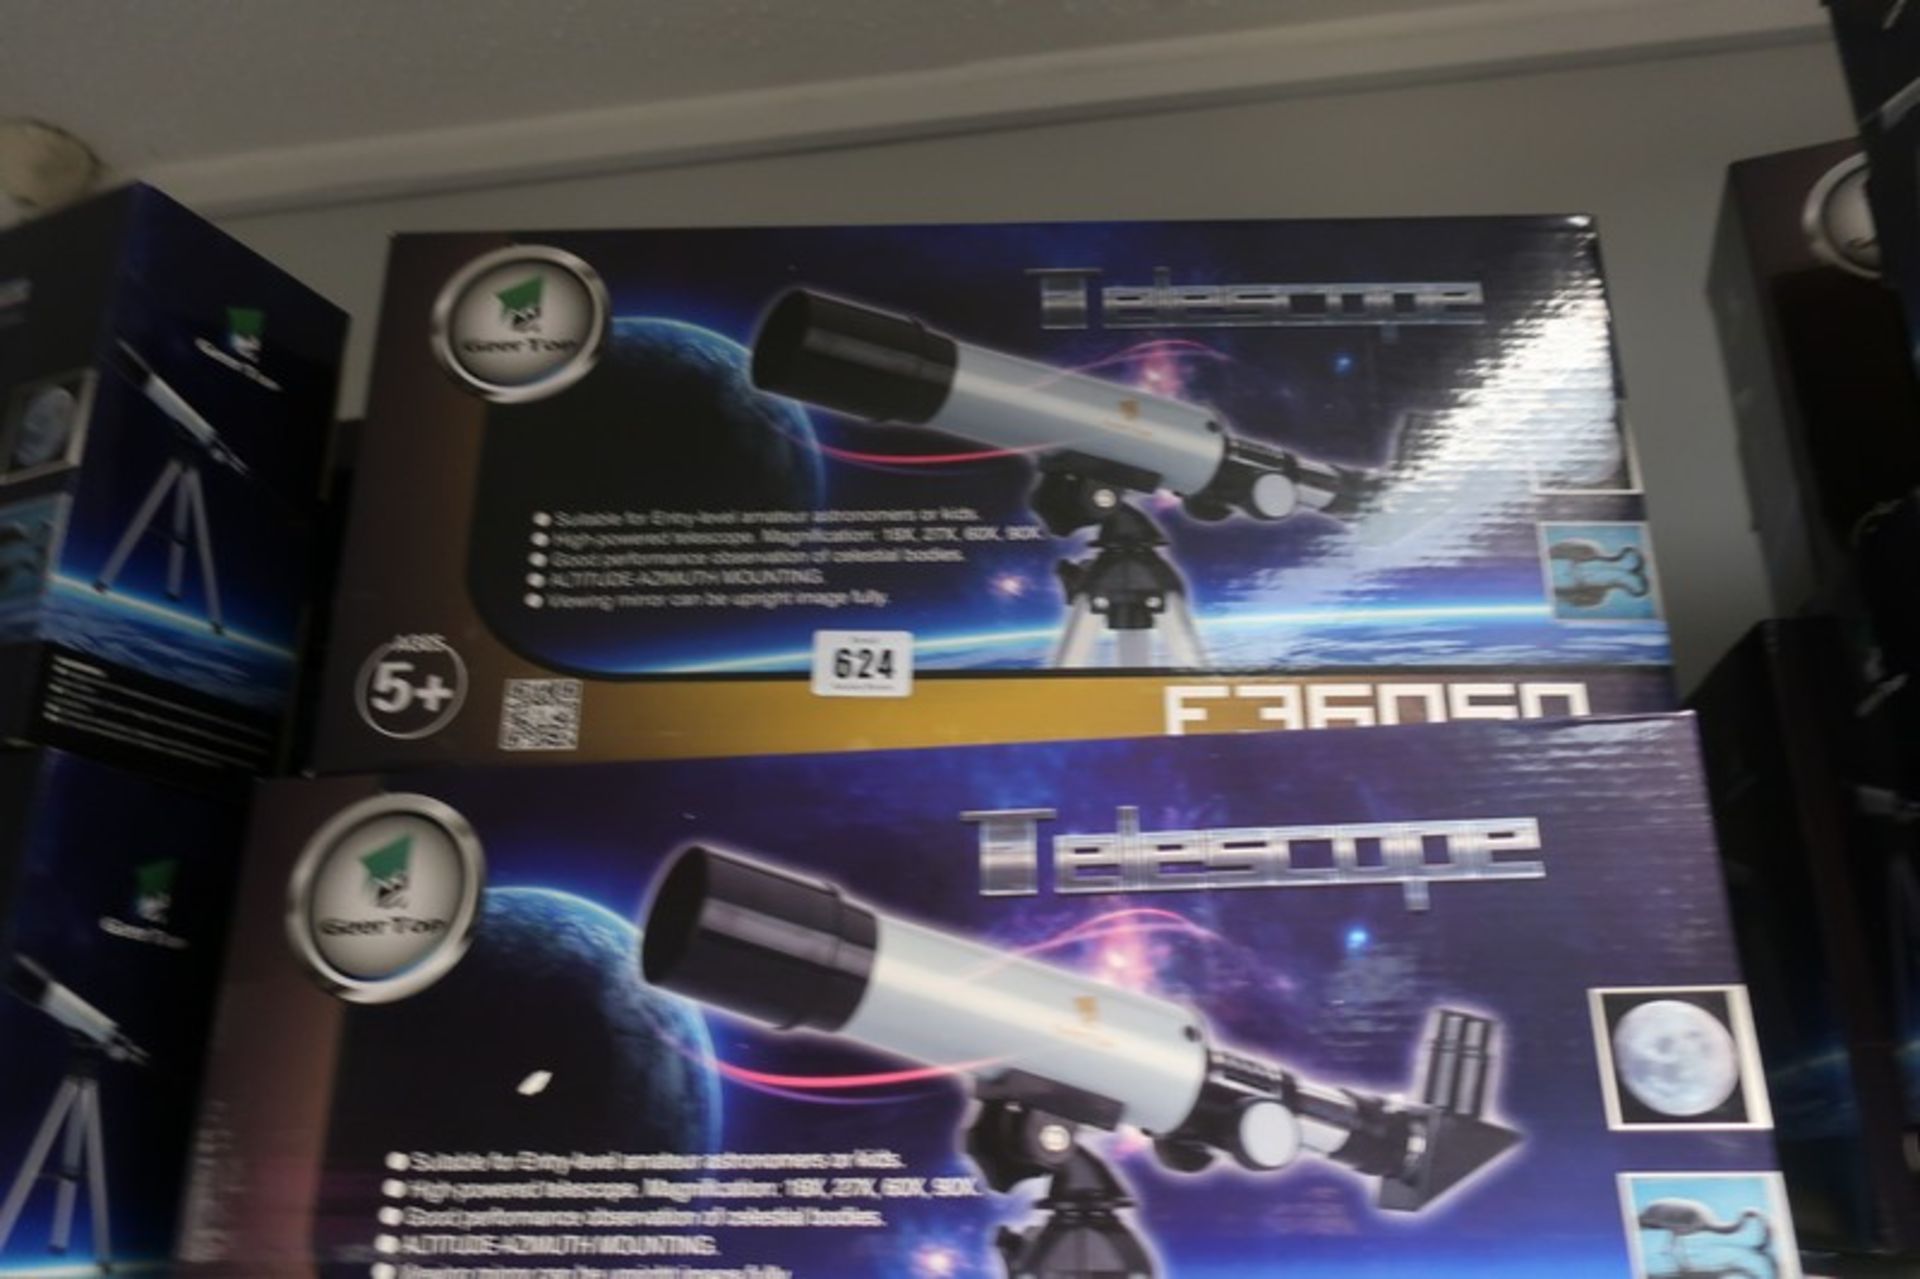 Five boxed as new GeerTop F36050 telescopes.